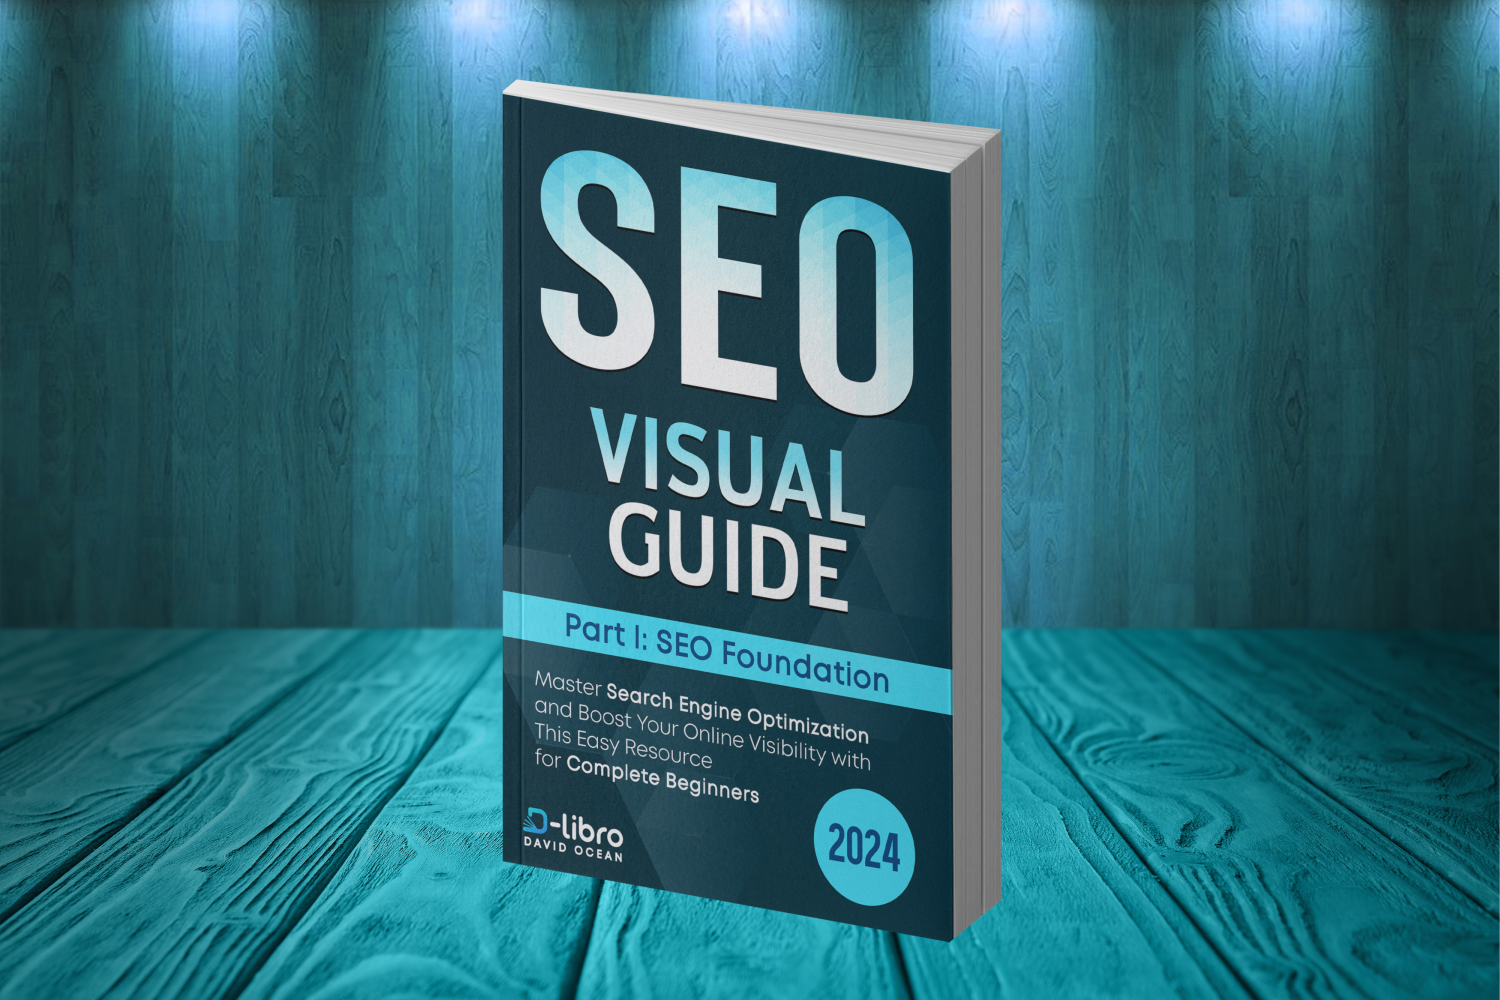 Search Engine Optimization (SEO) Visual Guide – Part I SEO foundation. Master Search Engine Optimization and Boost Your Online Visibility with This Easy Resource for Complete Beginners.